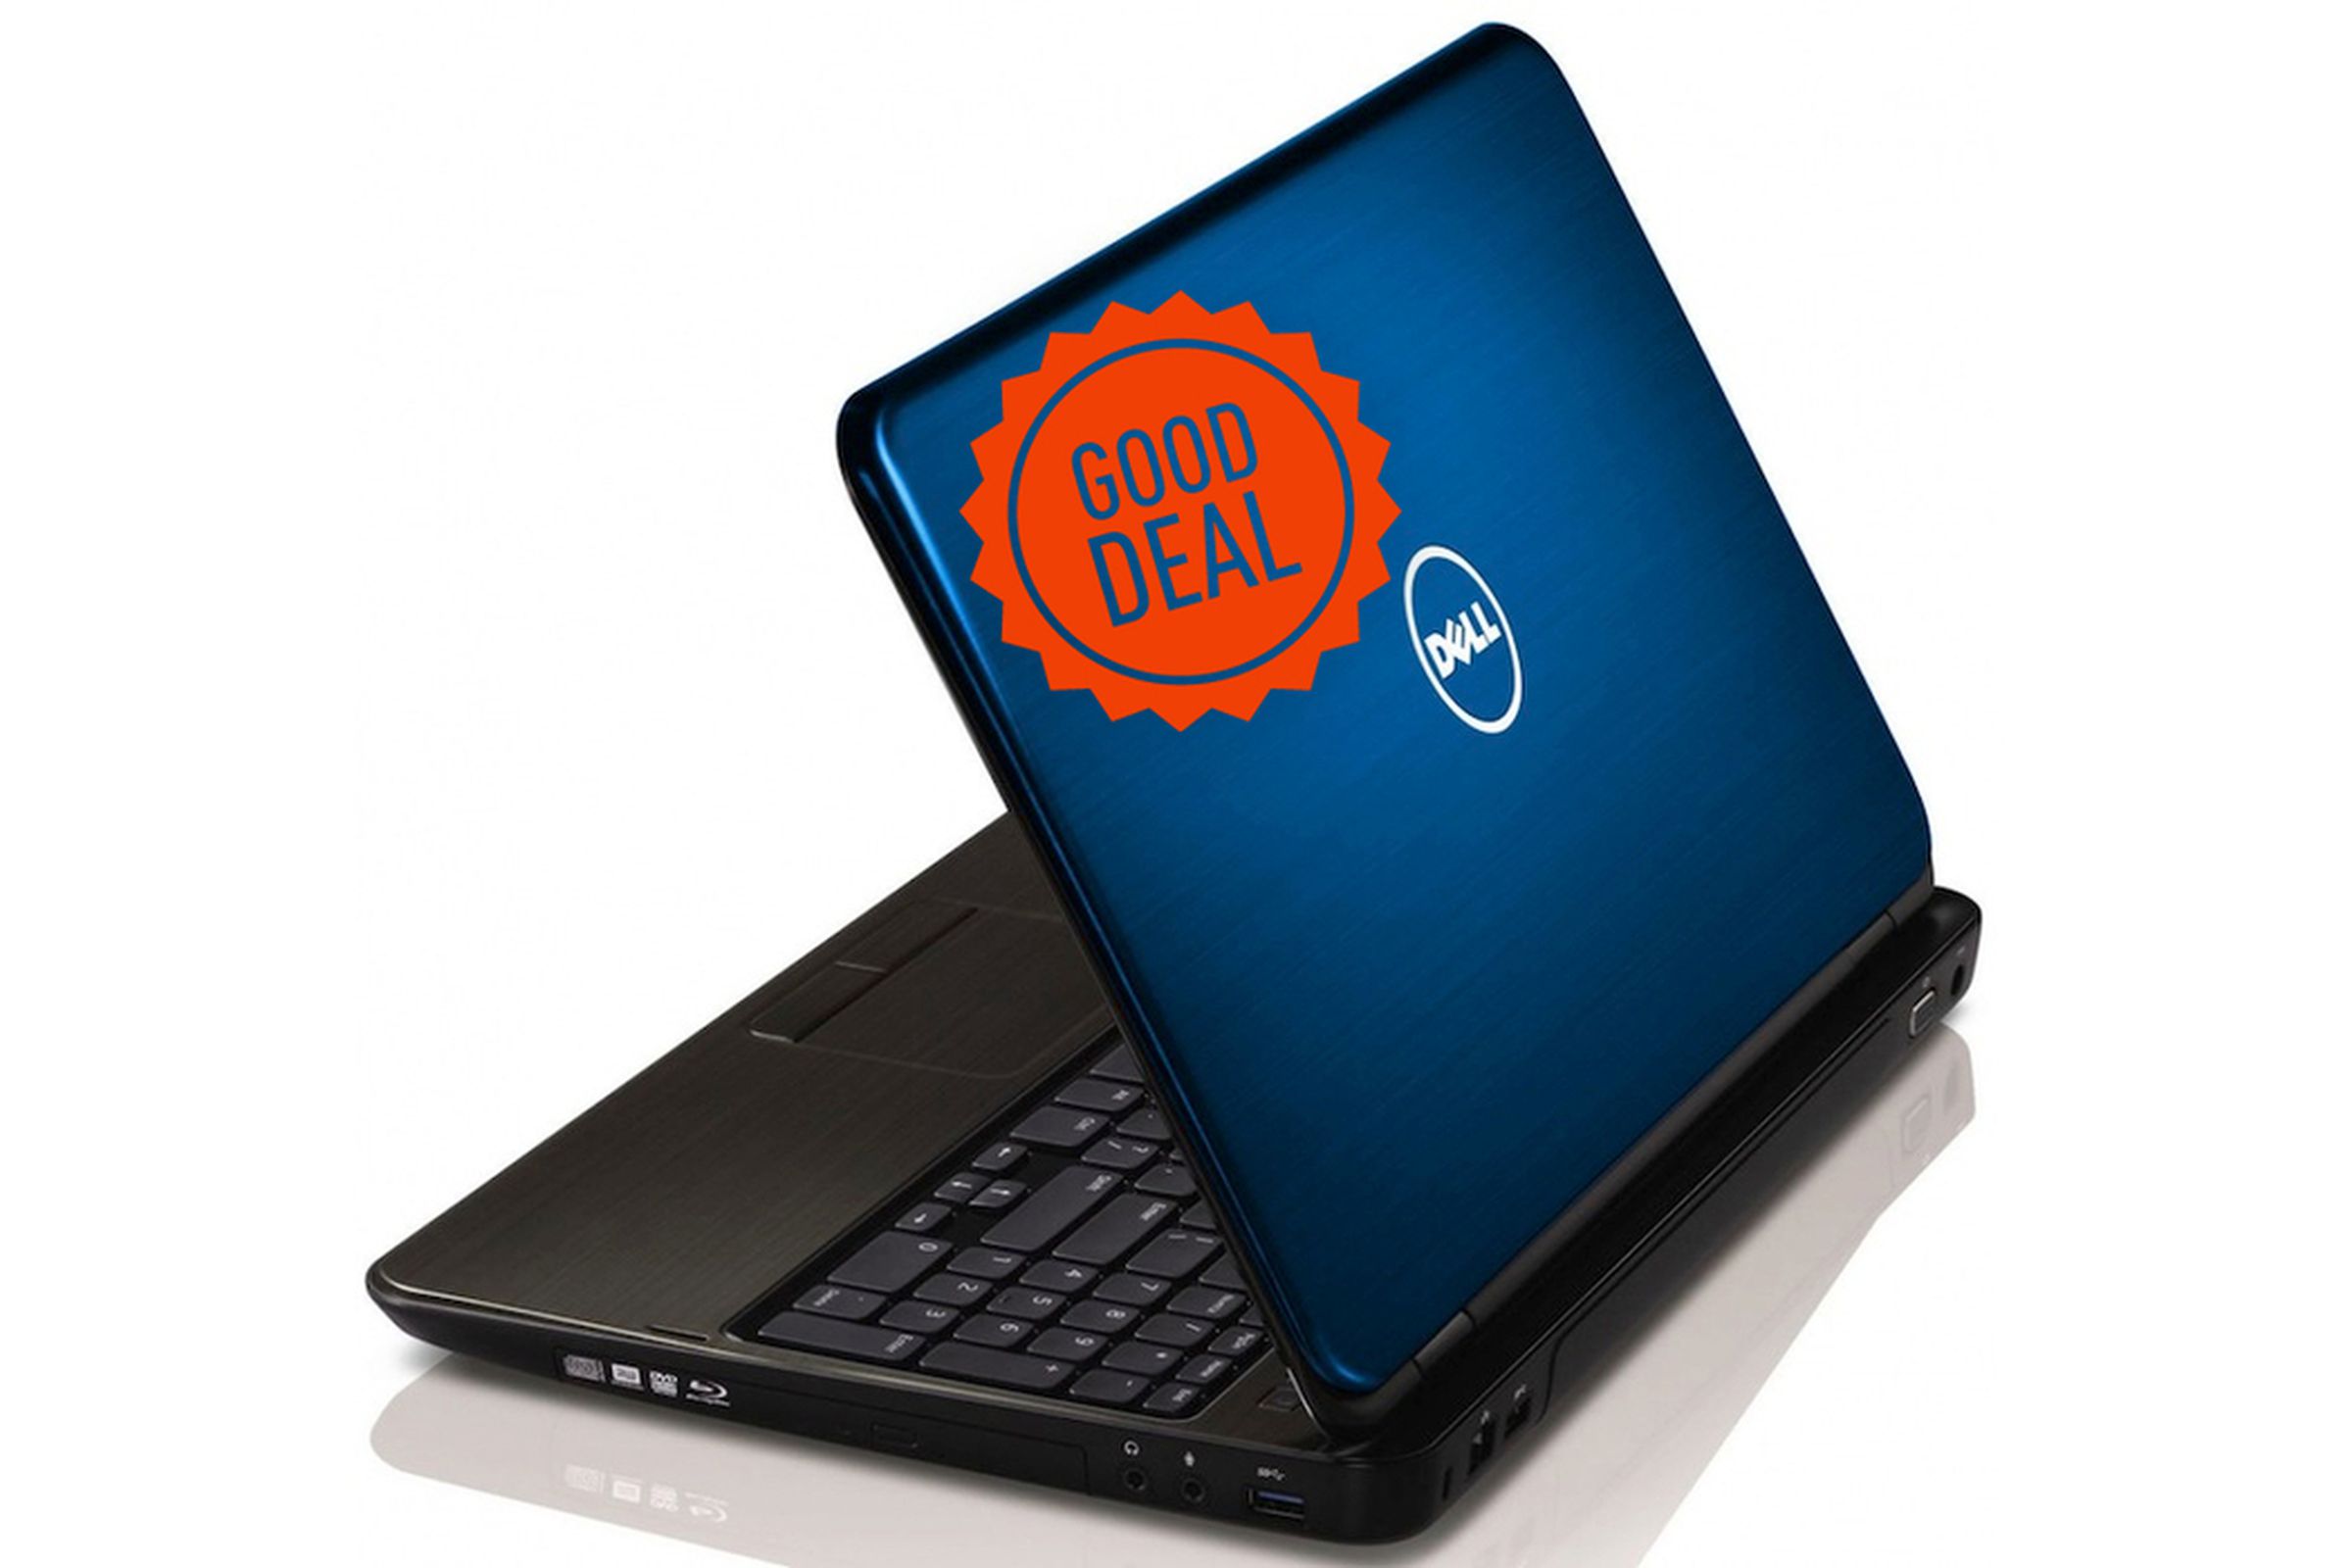 Dell Inspiron 15R Good Deal